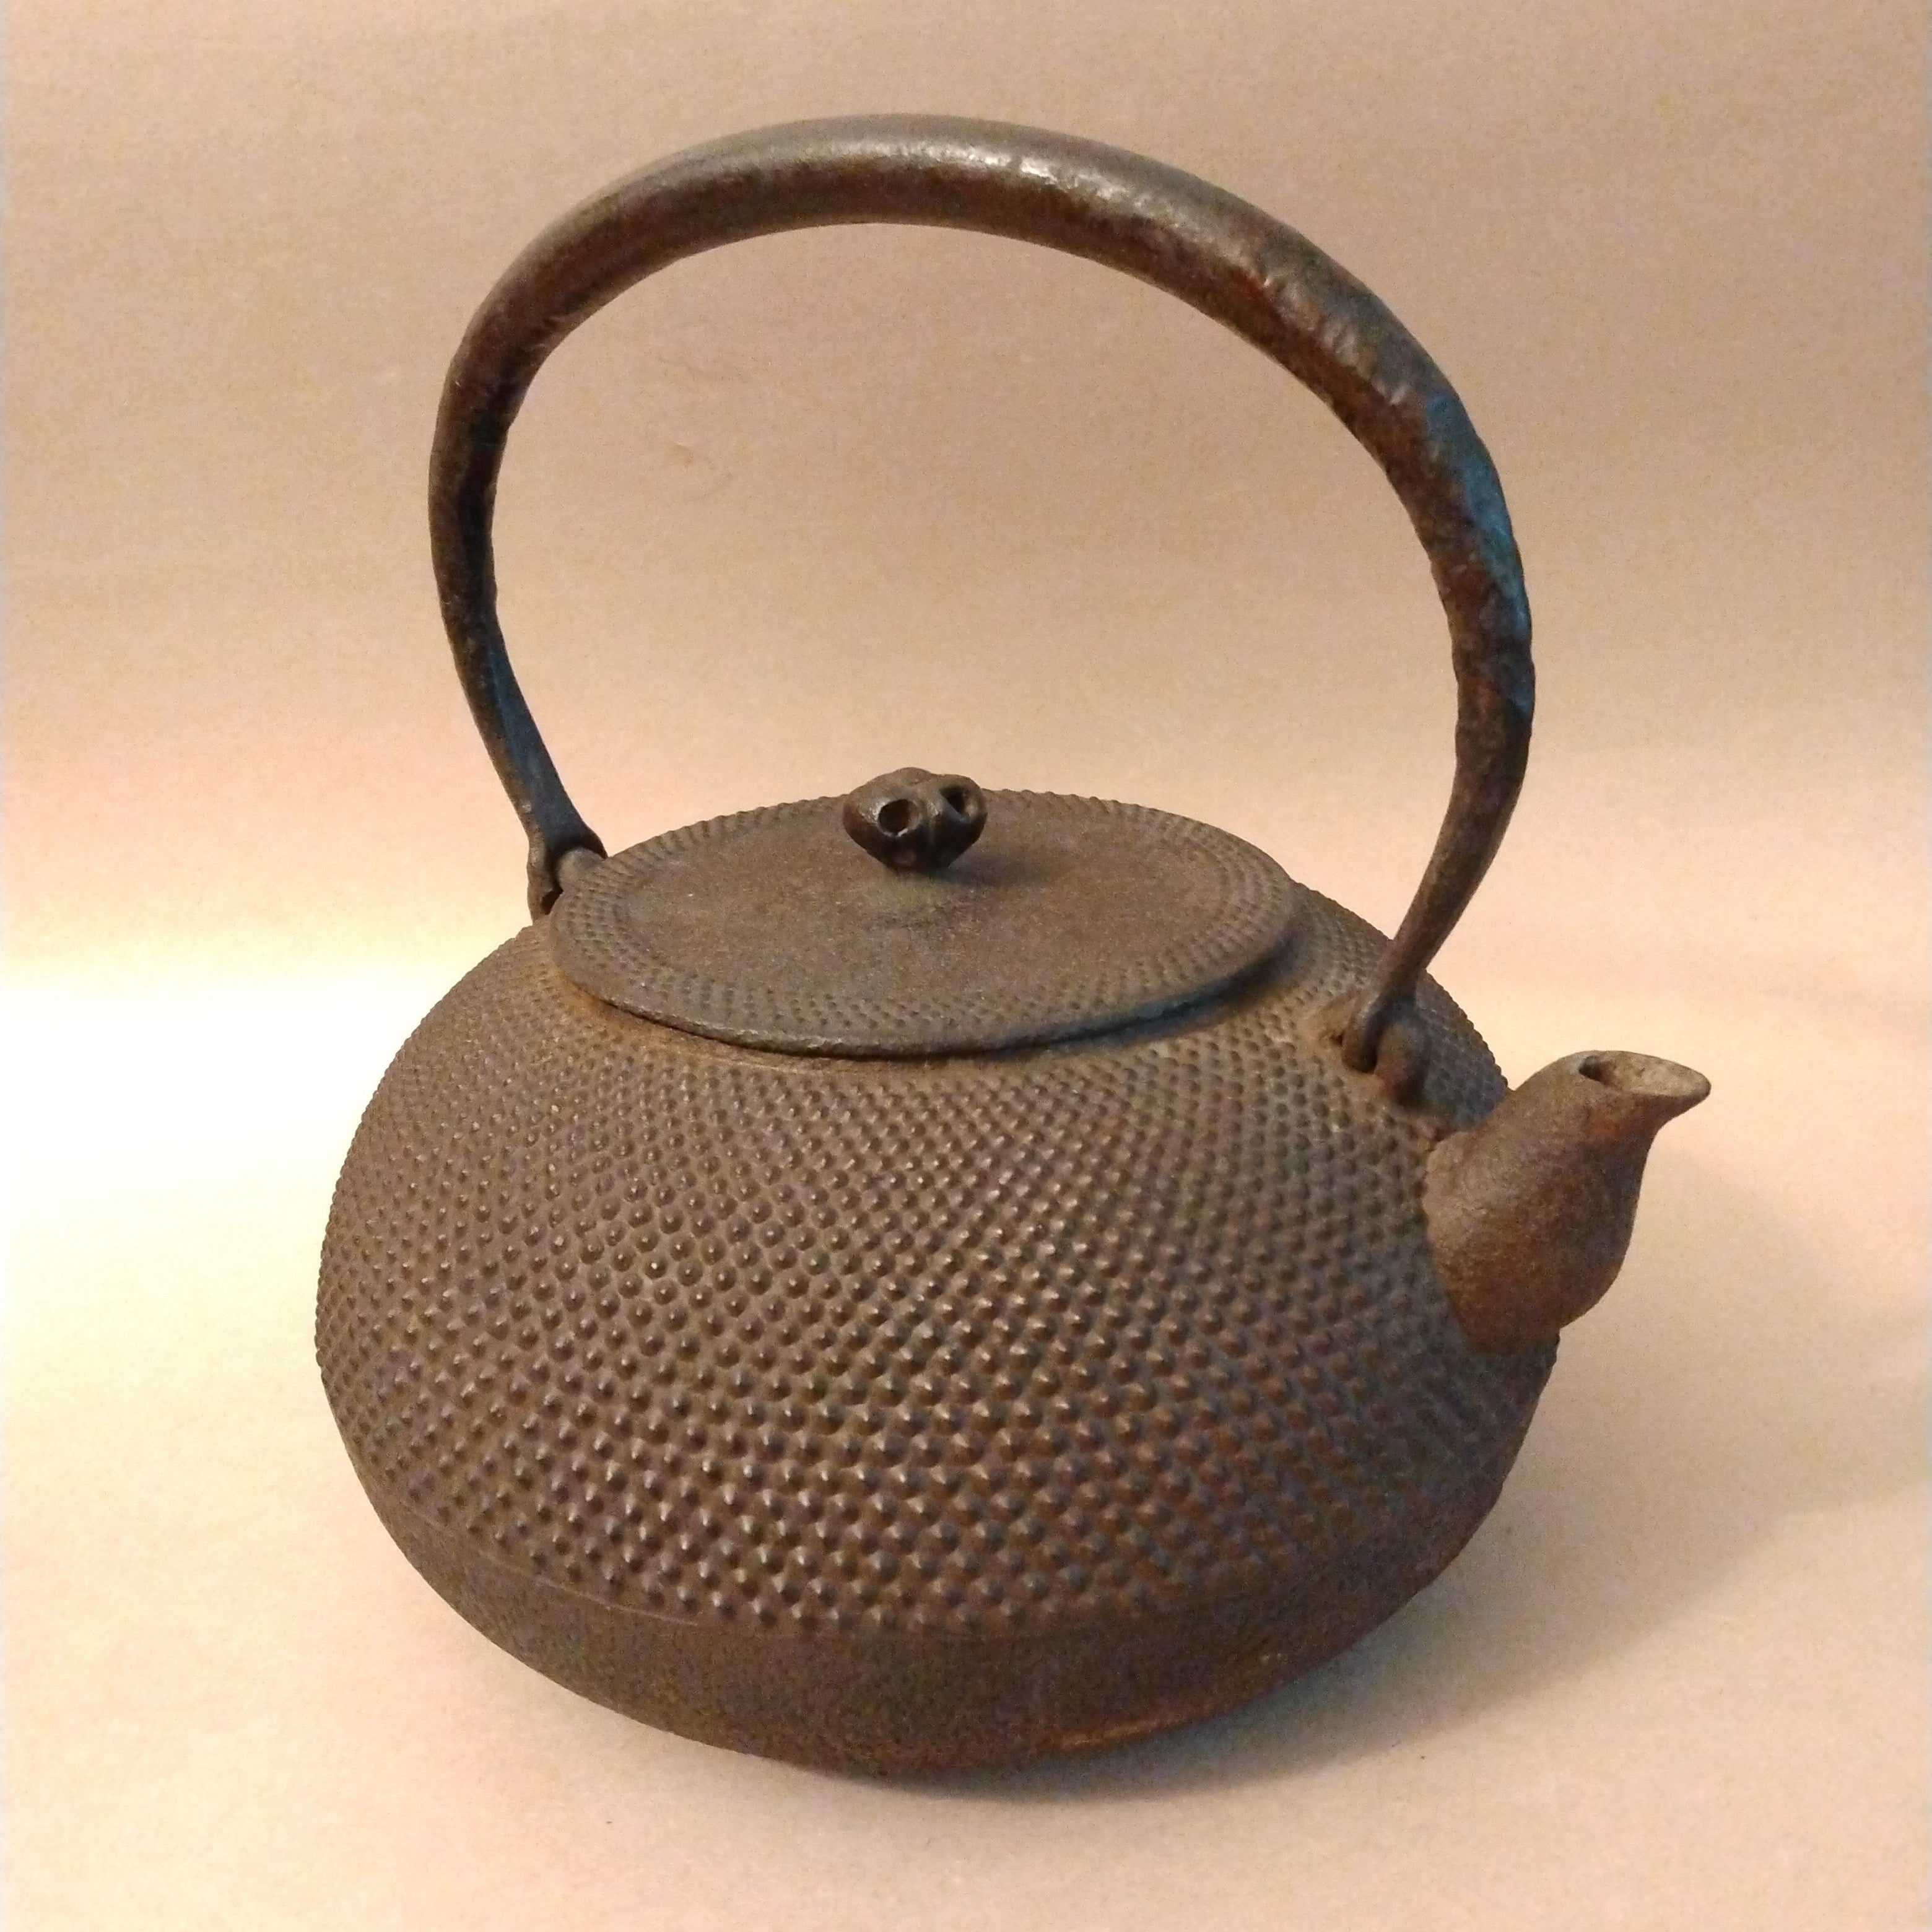 Nambu Testsubin, Cast Iron Kettle from Iwate Prefecture; Thiel Collection